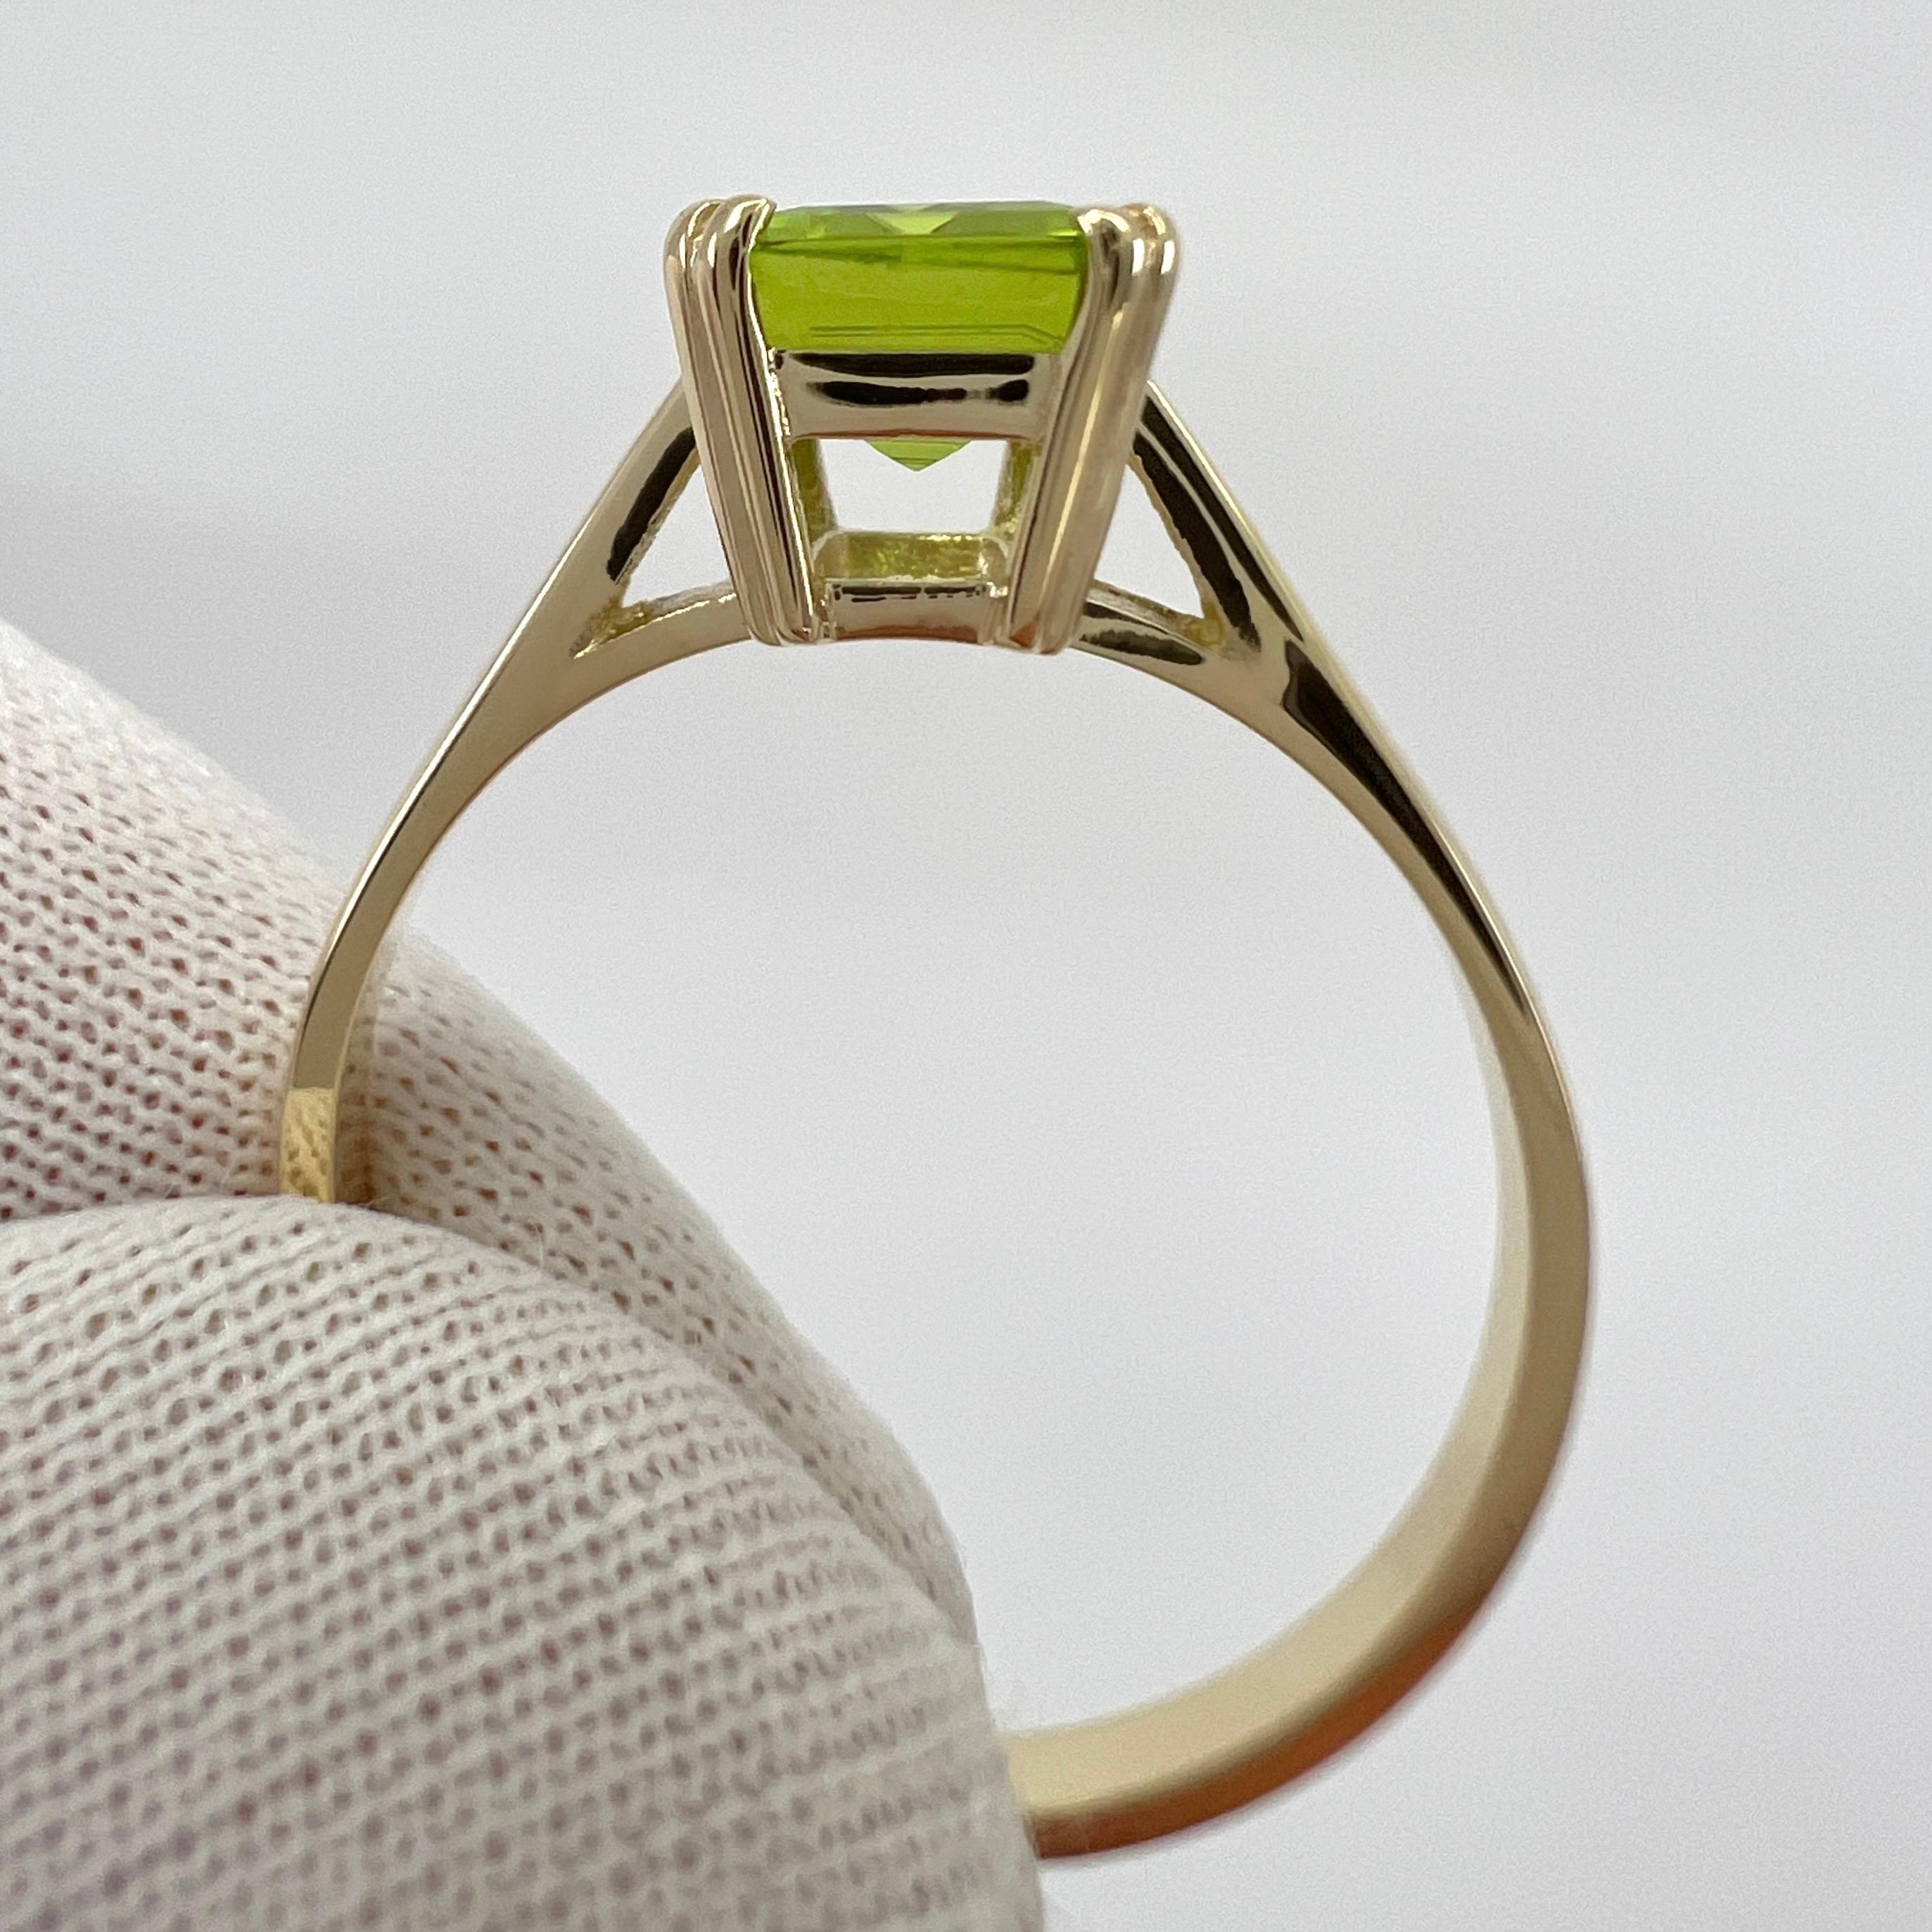 1.50ct Vivid Green Peridot Emerald Octagonal Cut 9k Yellow Gold Solitaire Ring For Sale 4